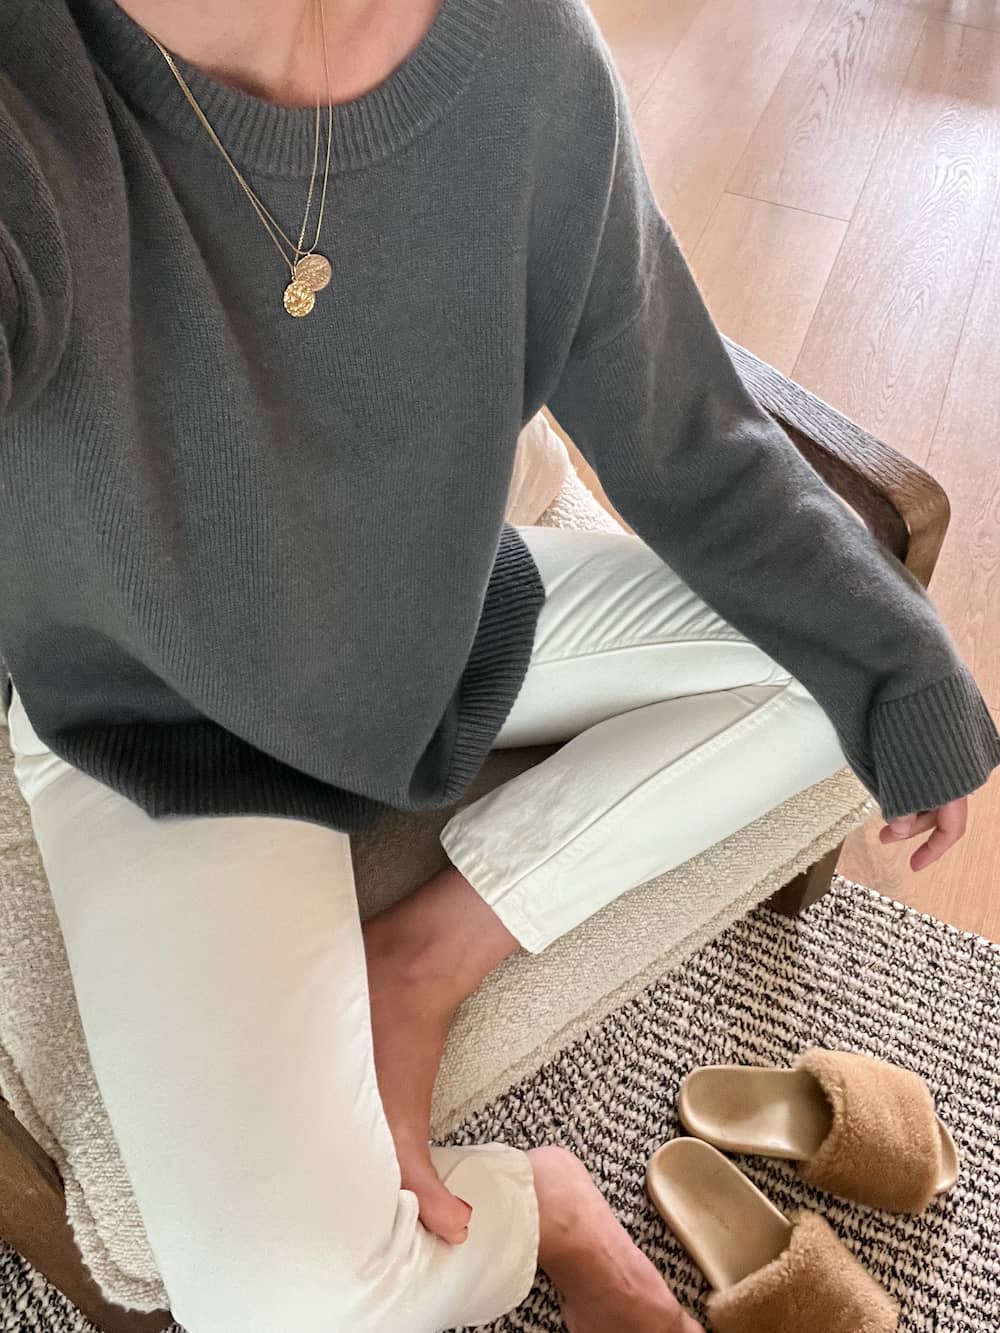 Up close image of a woman wearing a dark stormy blue cashmere sweater from Jenni Kayne, off-white jeans, and shearling slippers